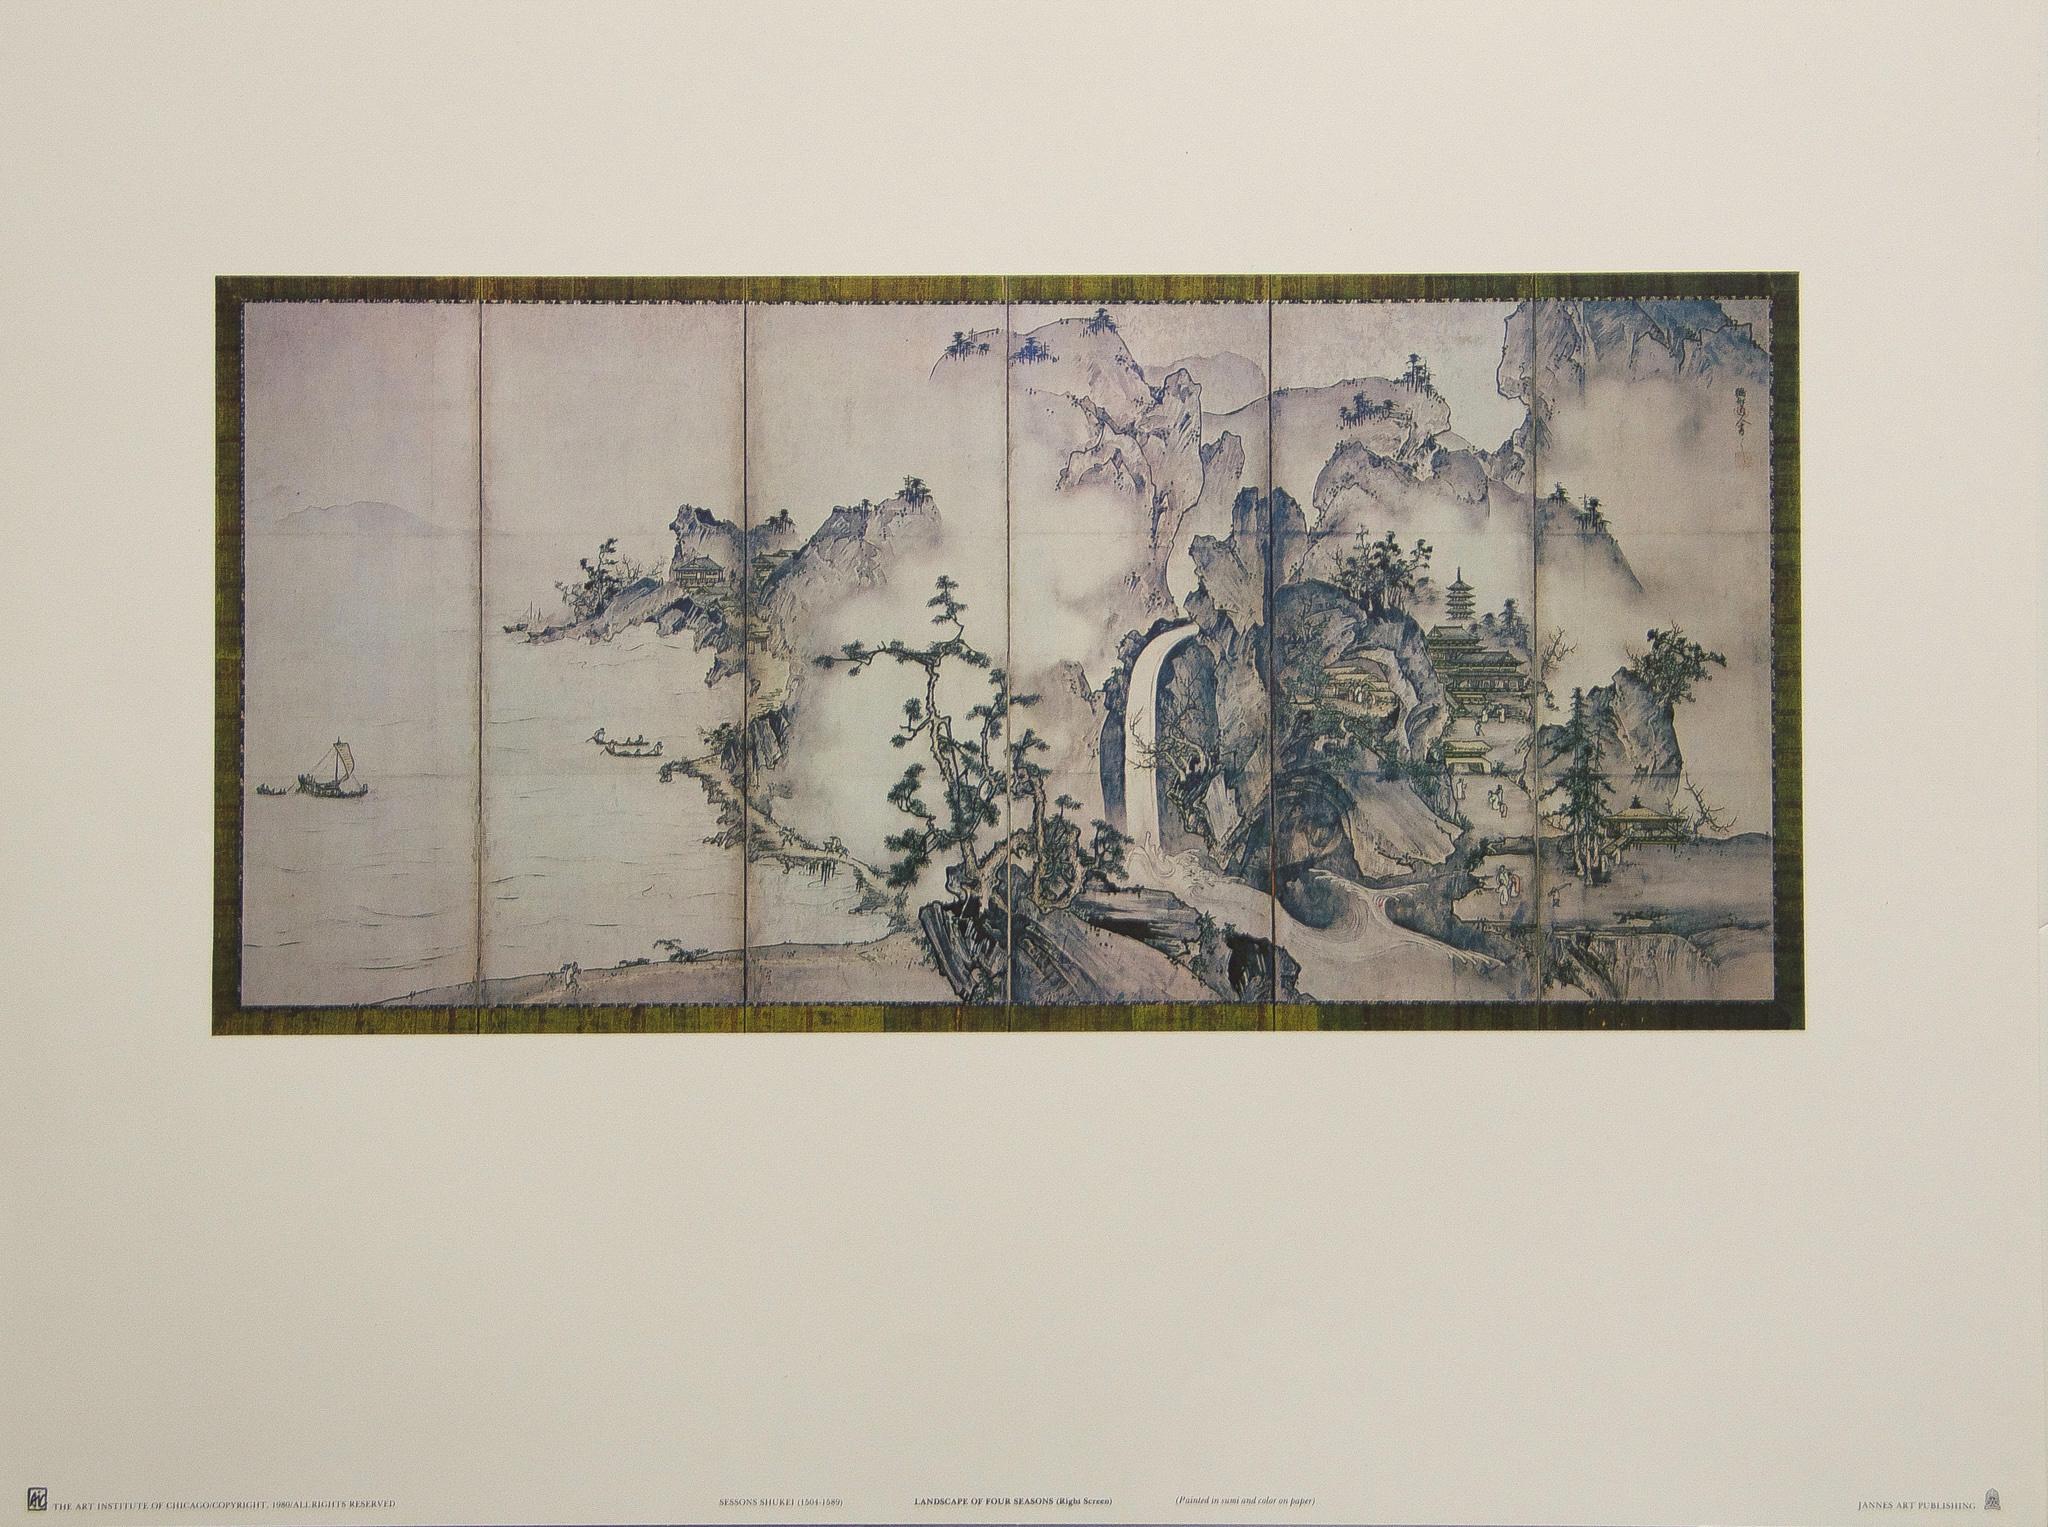 Sessons Shukei  Landscape Print - "Landscape of Four Seasons" (Right Screen) by Sessons Shukei. Pub by Jannes Art.